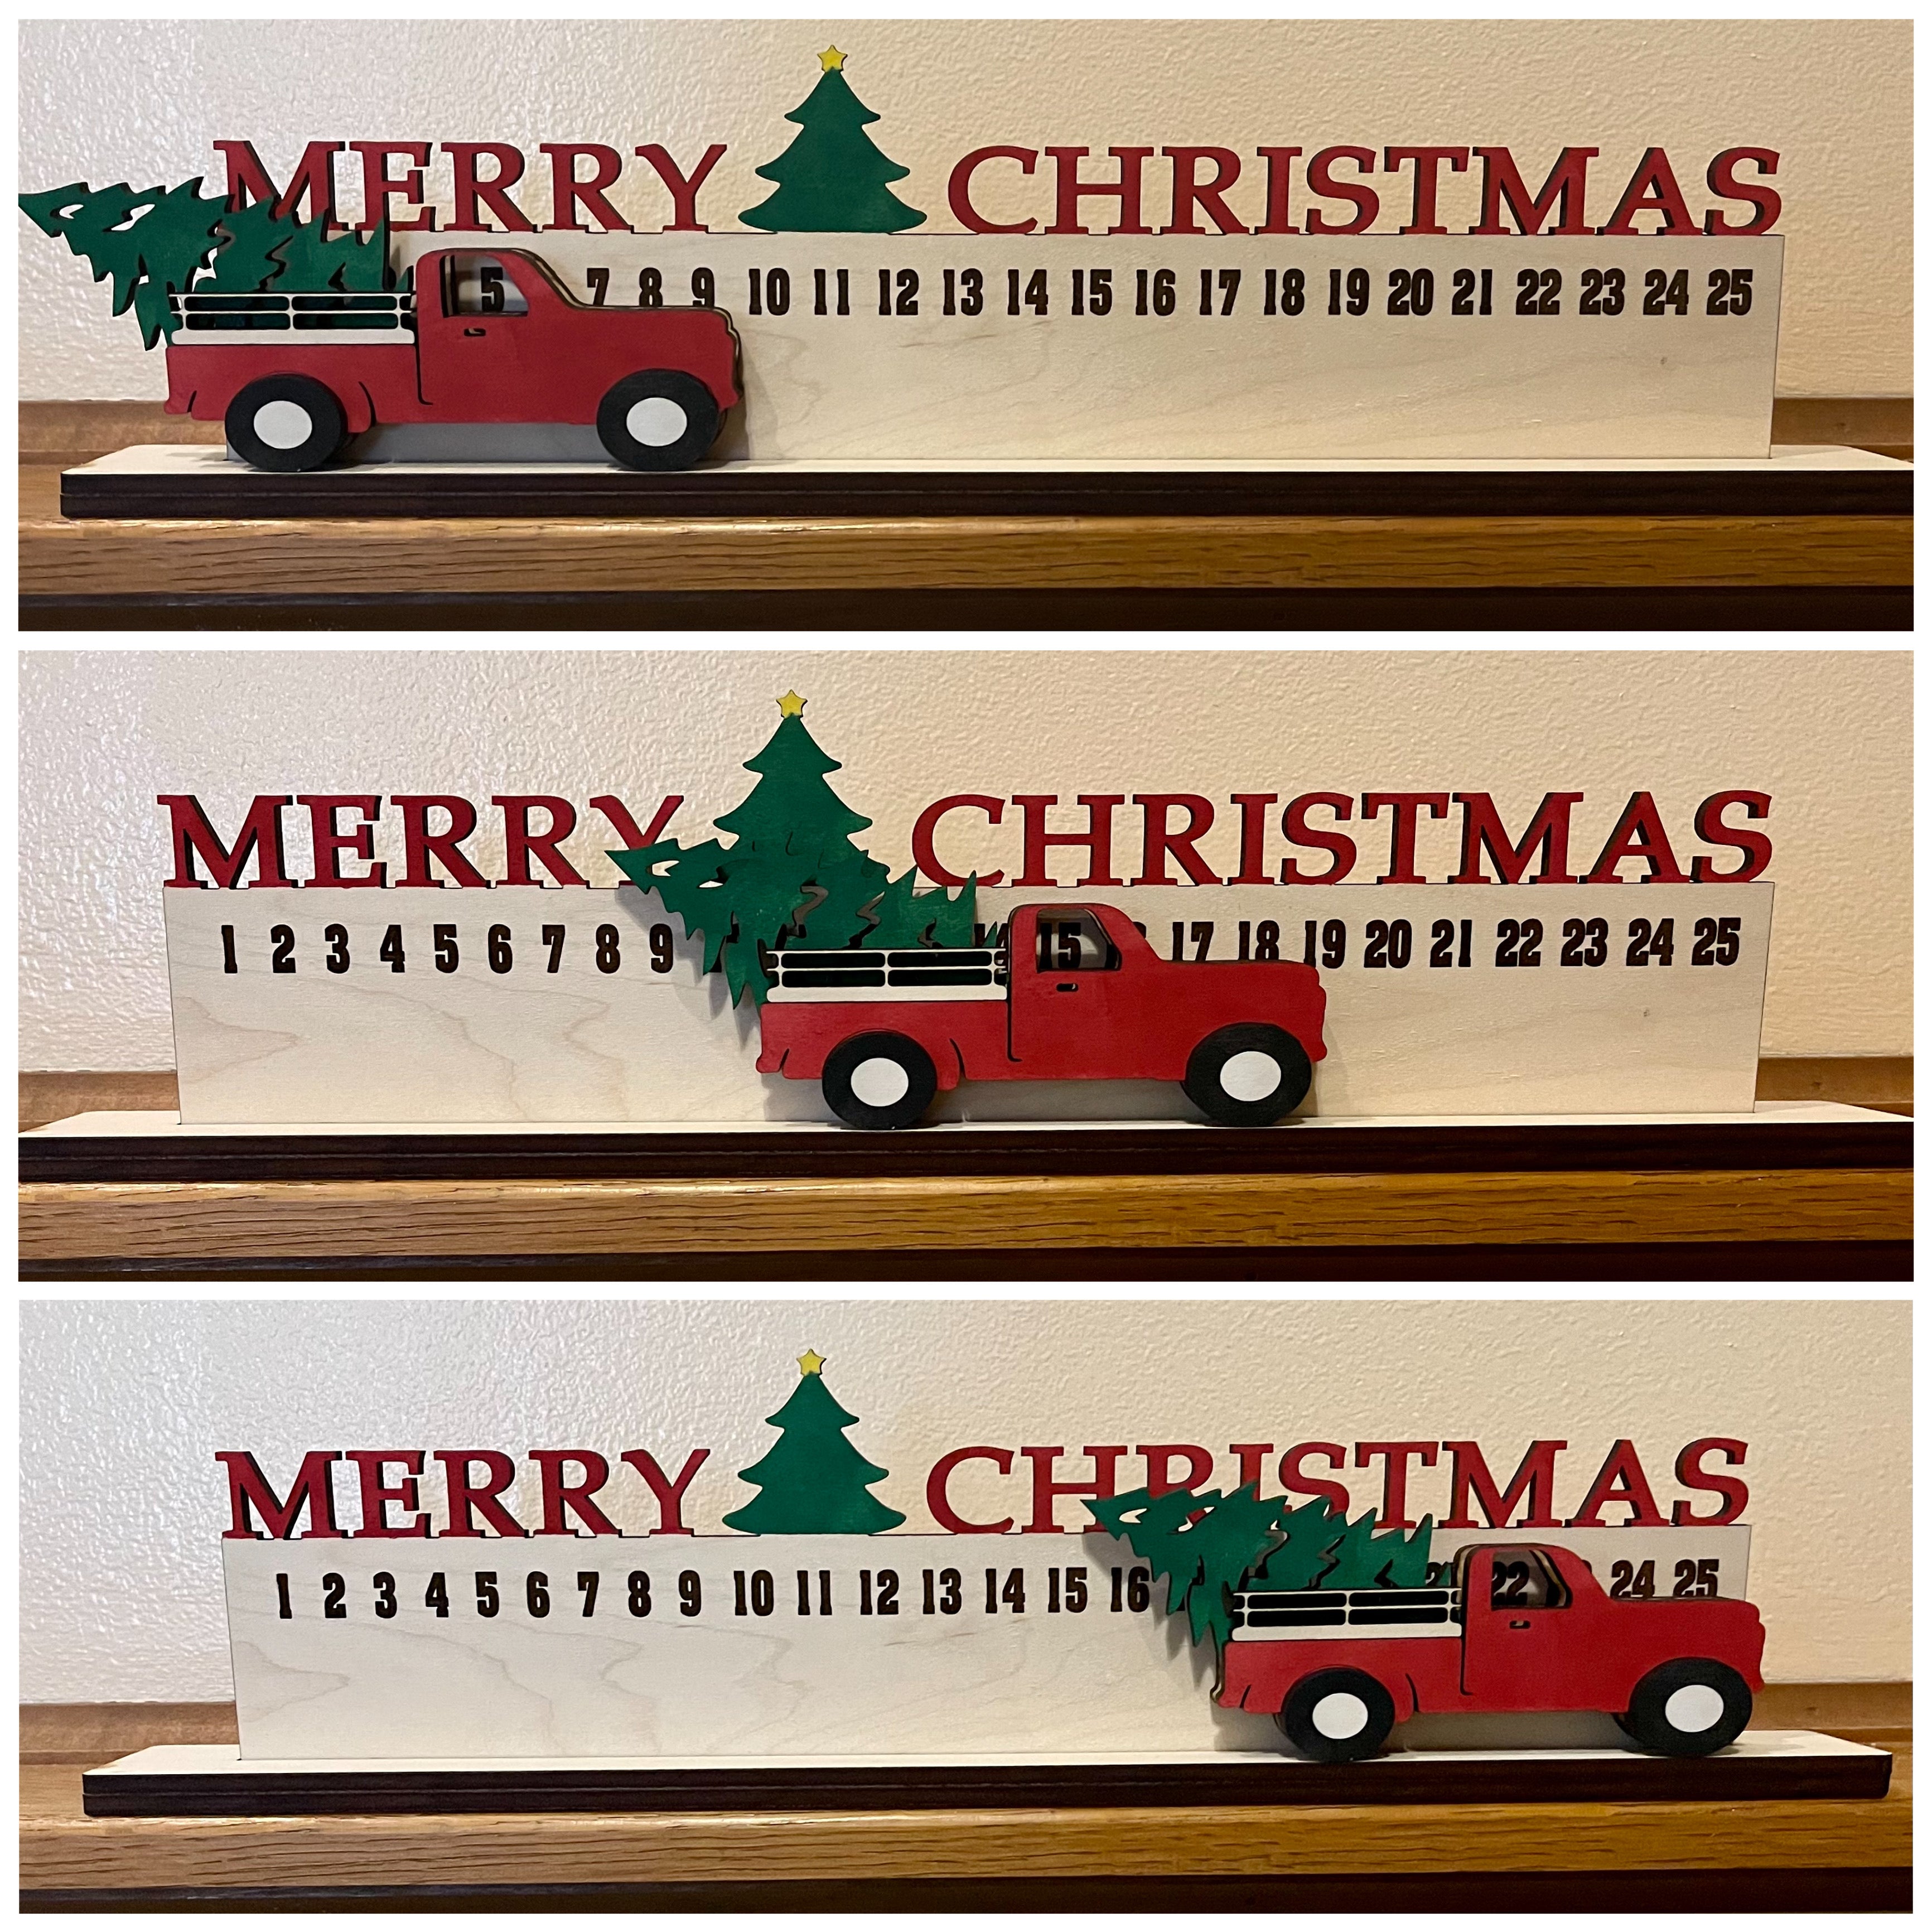 DIY Wooden Sign Kit - Red Truck Christmas Countdown